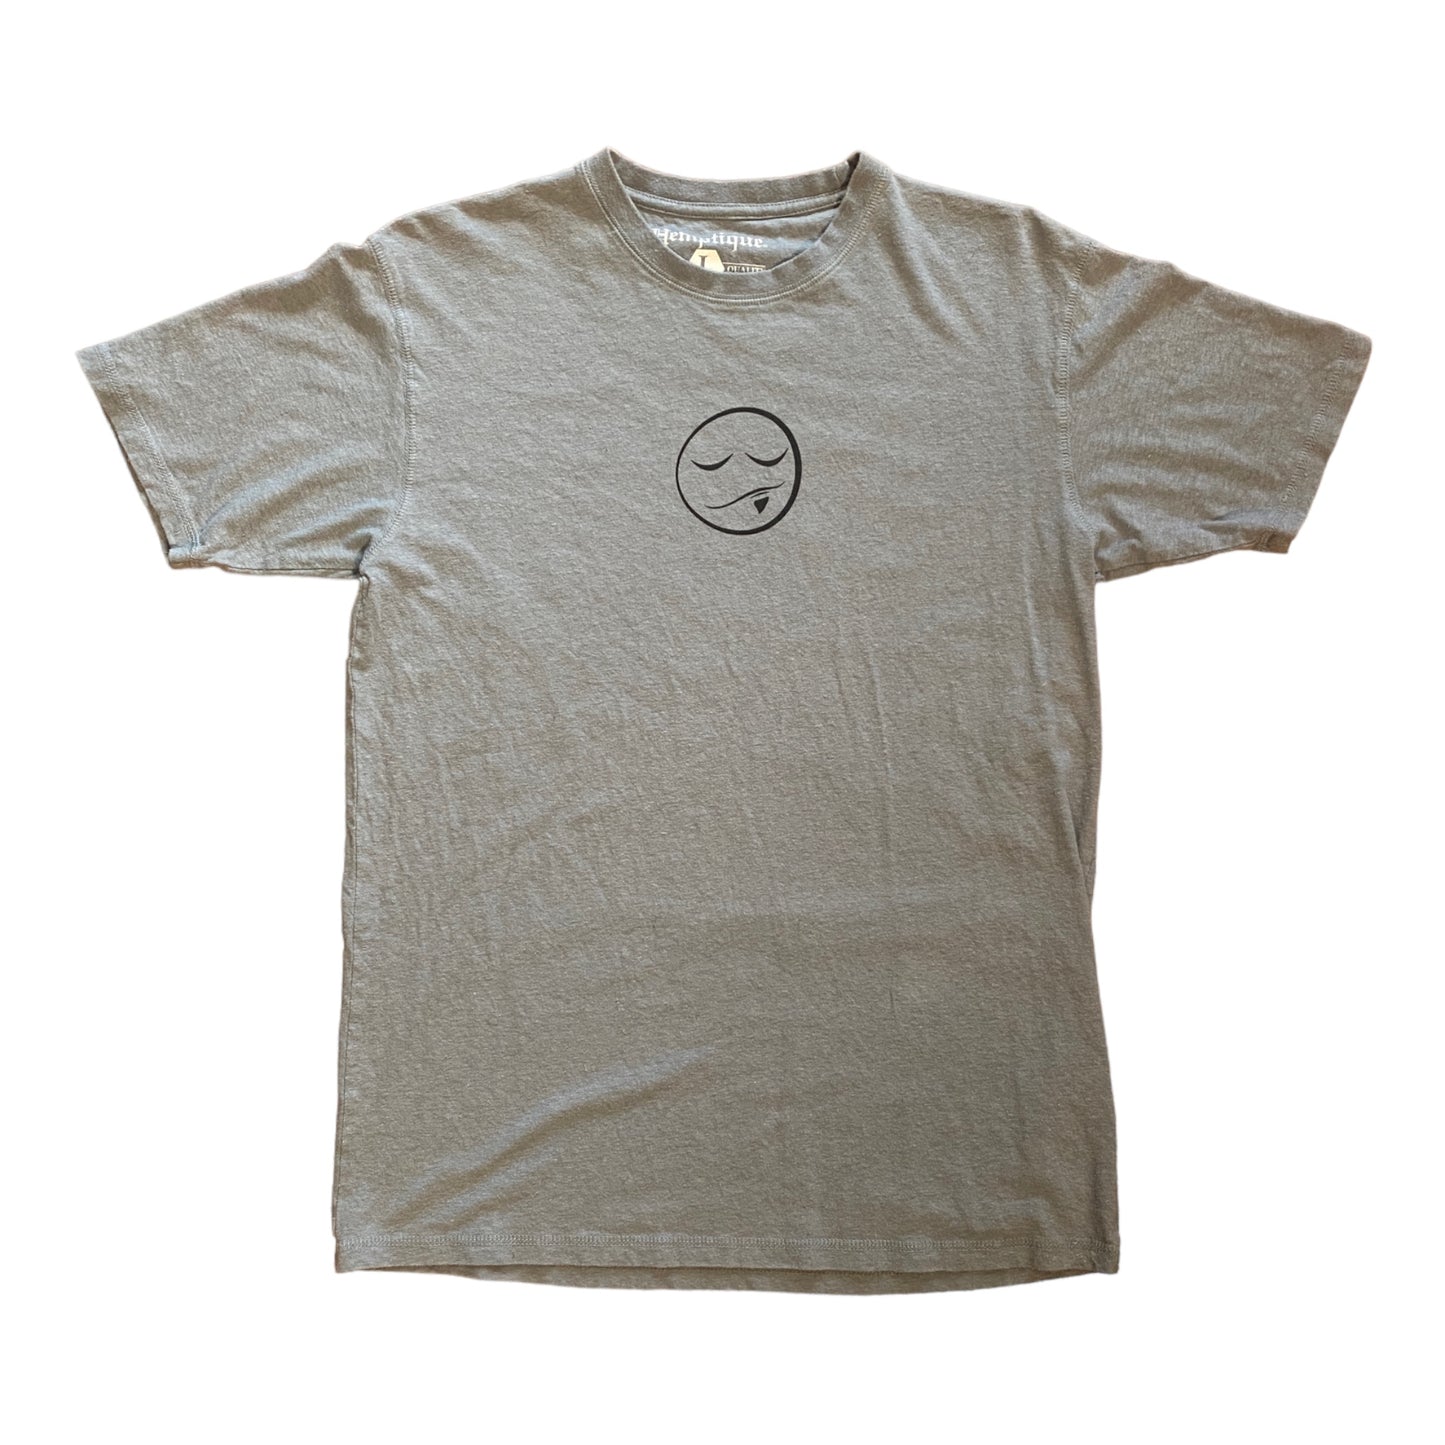 Move With Intuition Hemp T-Shirt